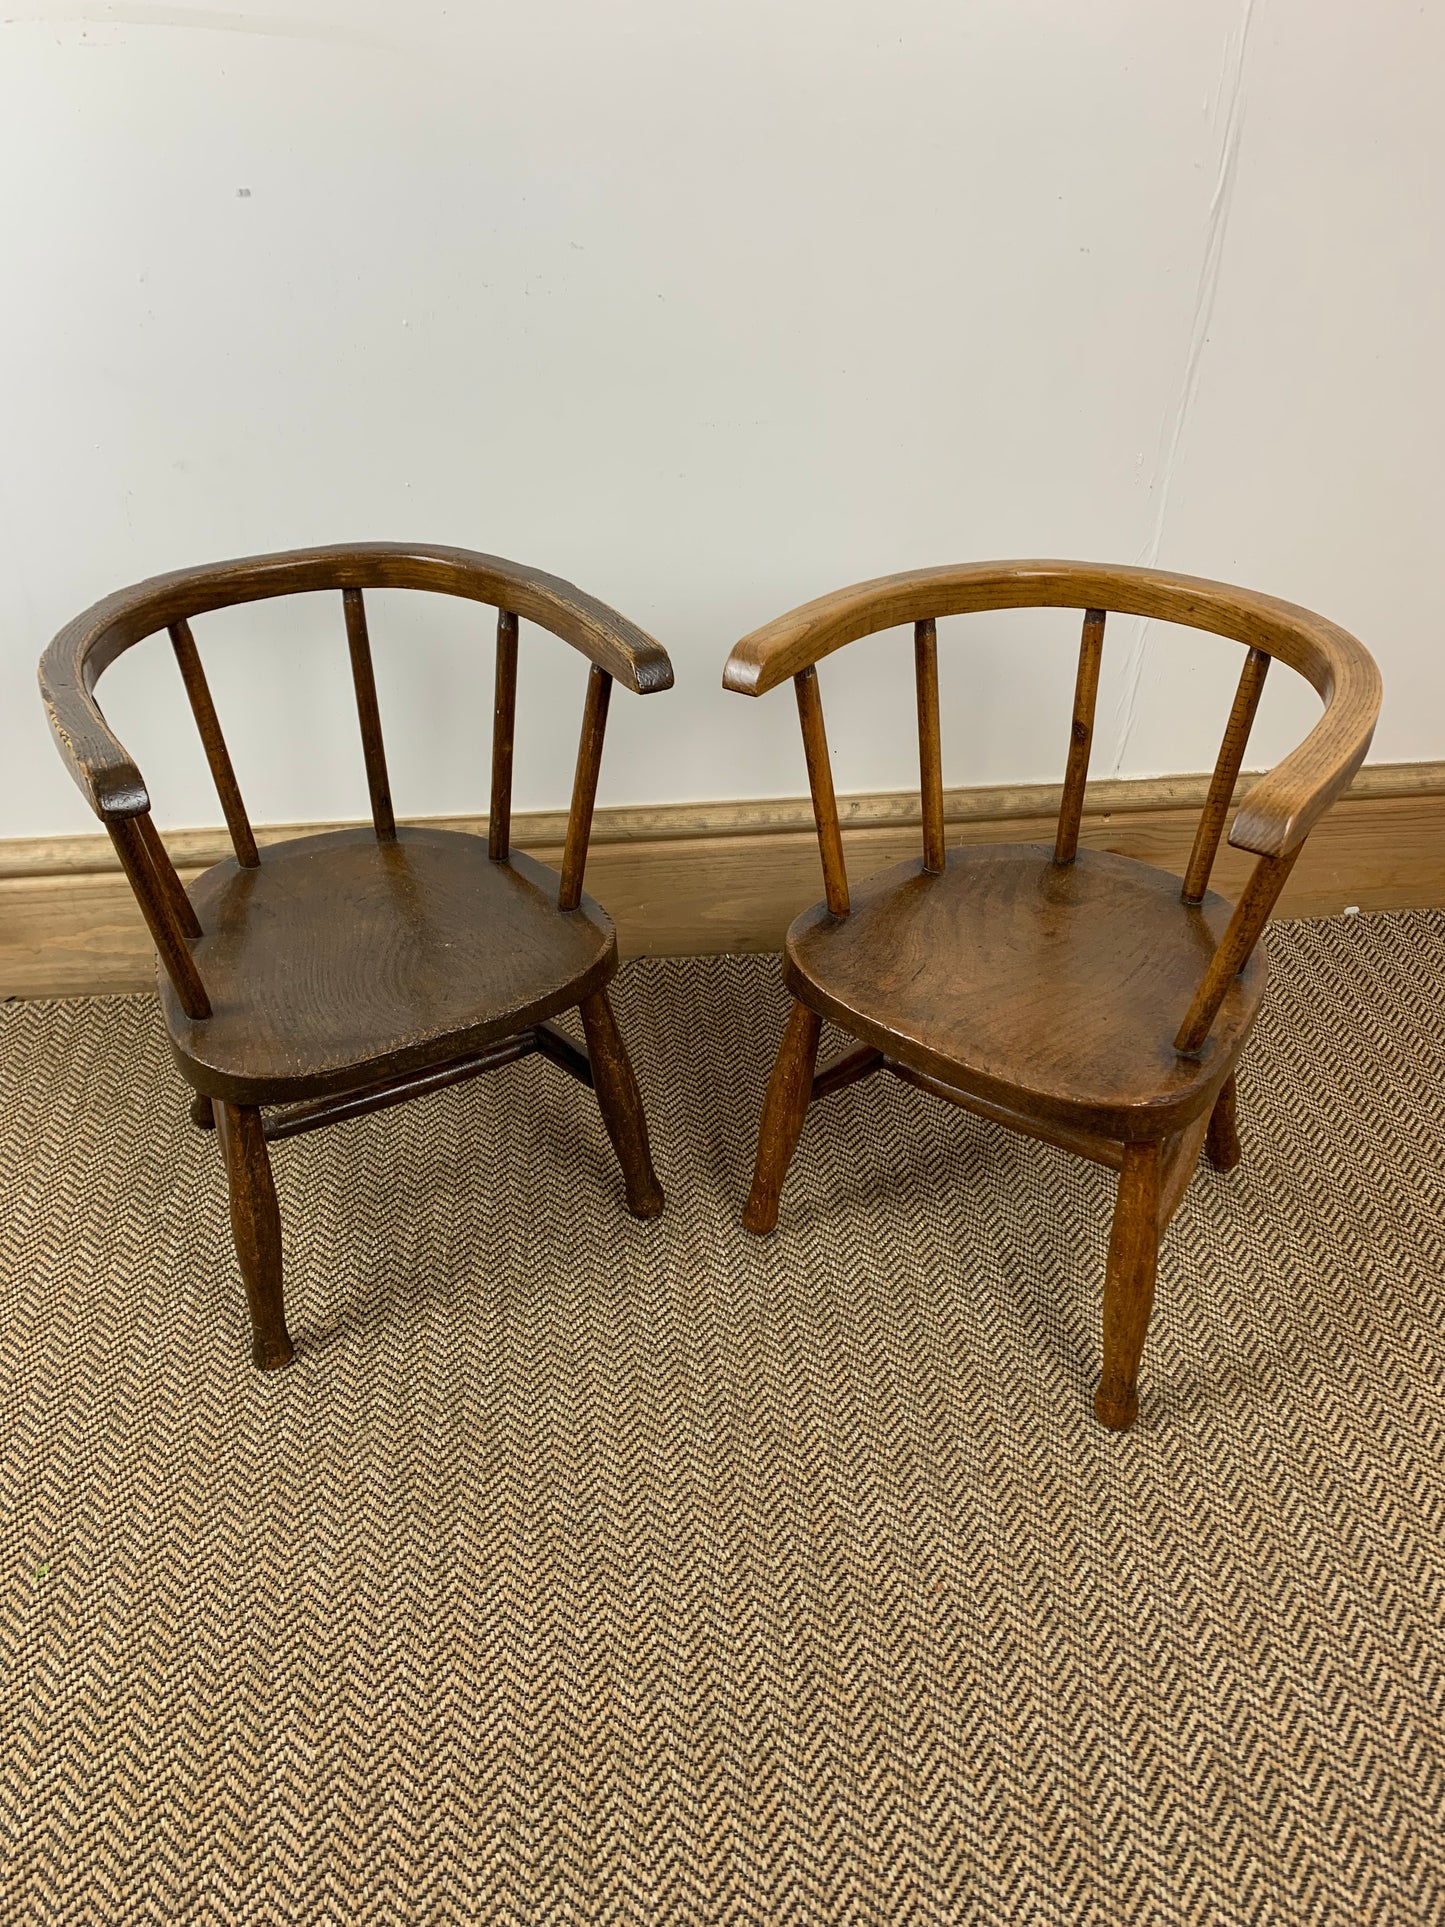 Pair of Edwardian Child's Chairs: Vintage Elegance for Little Ones